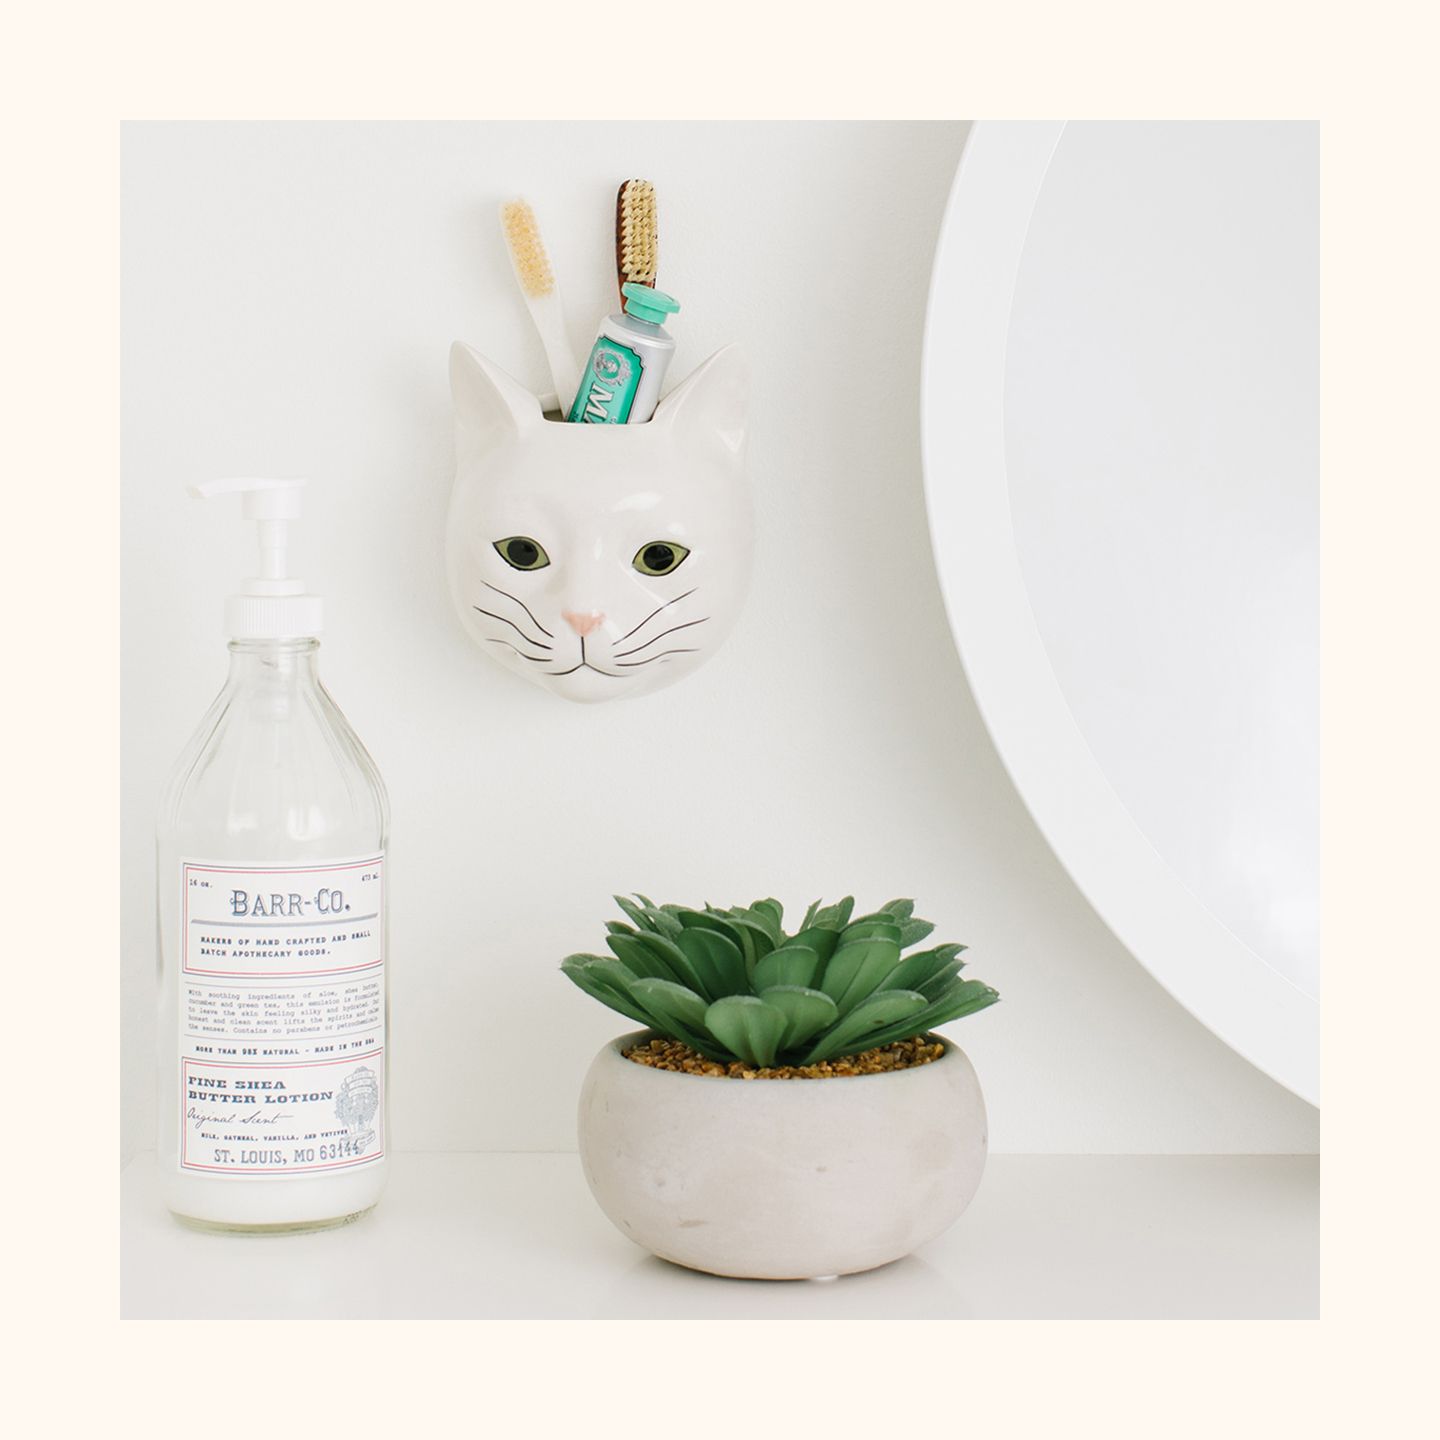 A cat ceramic wall vase holding a toothbrush and toothpaste.